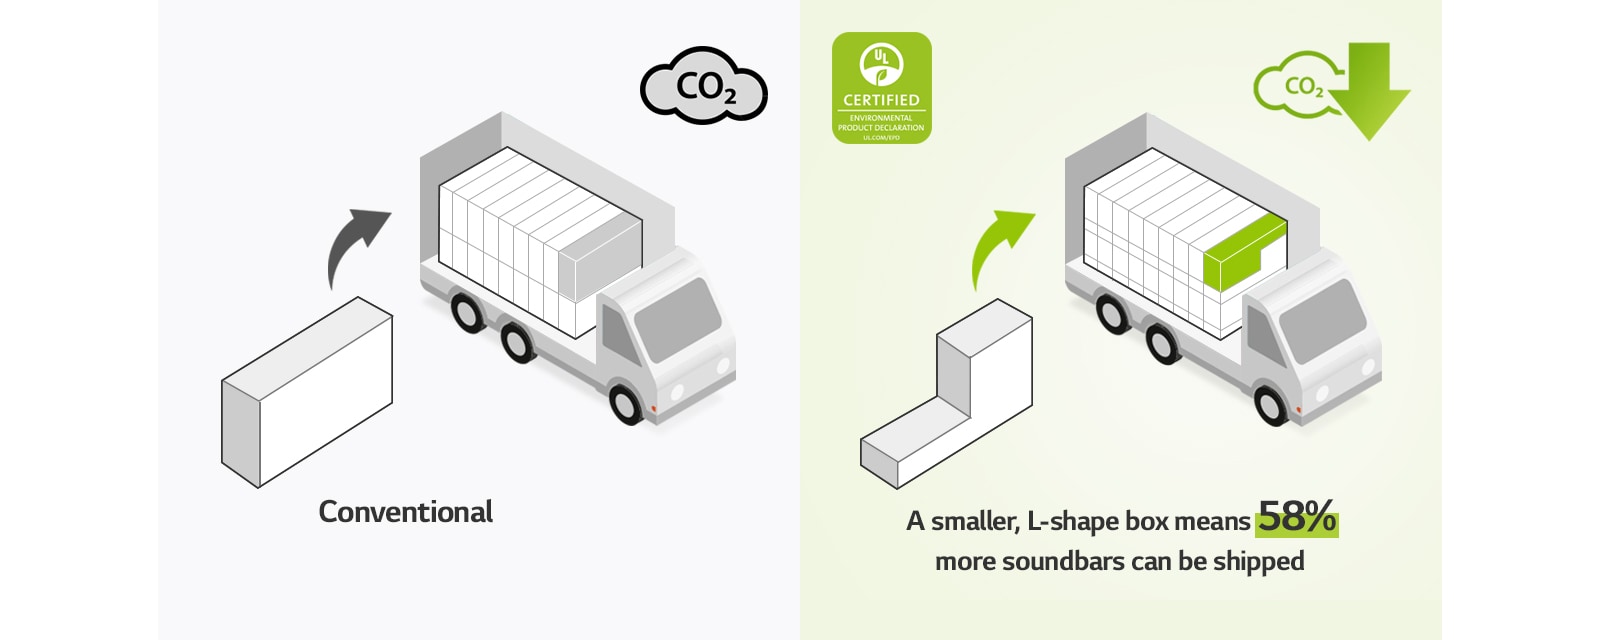 On left side, there is a pictogram of a regular rectangular shaped box and a truck with many rectangular boxes. There also is a CO2 icon. On right side, there is an L-shaped box and a truck with many more L-shaped boxes. There also is a CO2 reduction icon.